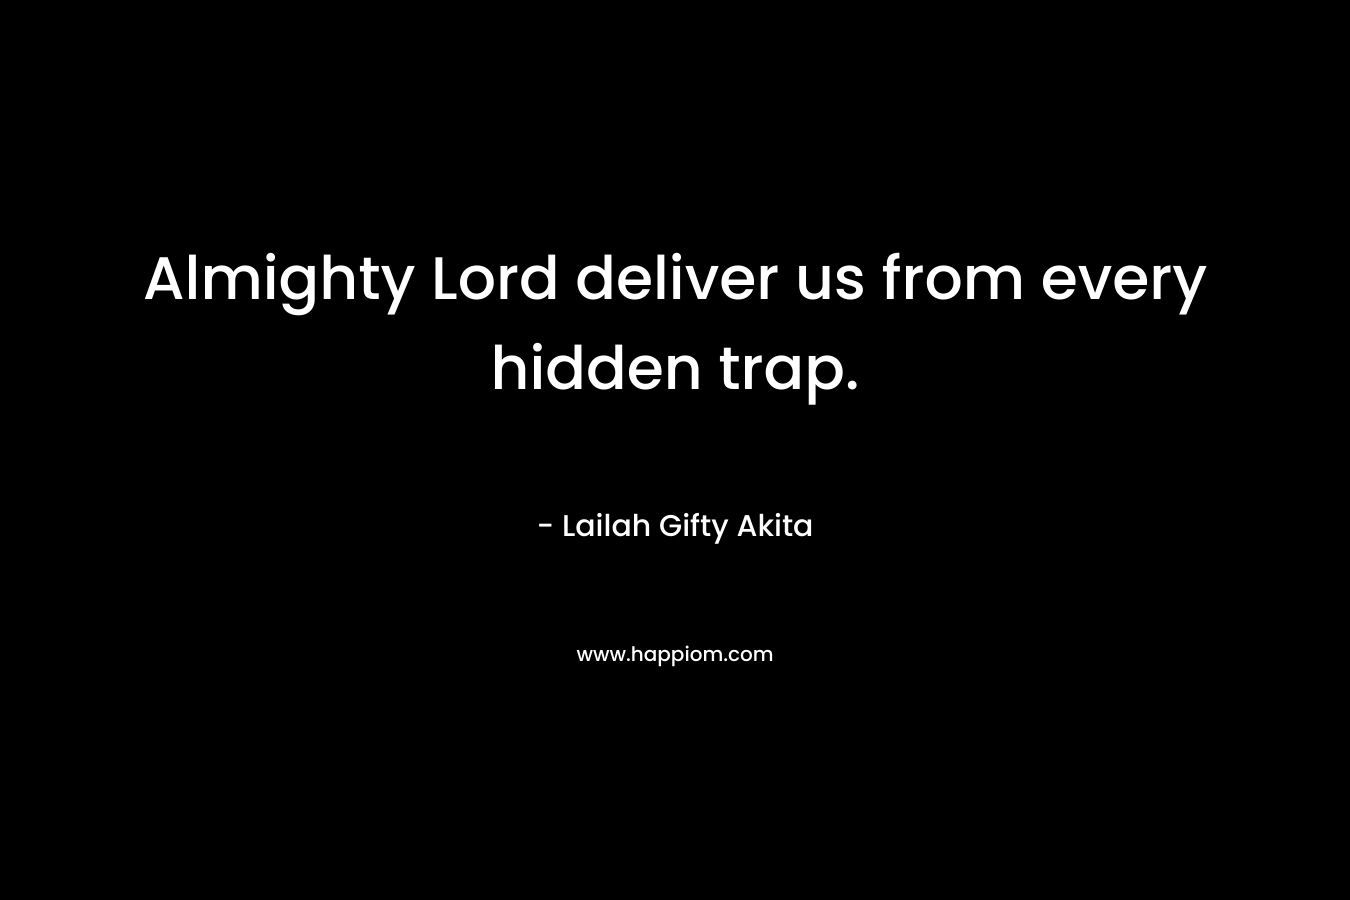 Almighty Lord deliver us from every hidden trap. – Lailah Gifty Akita